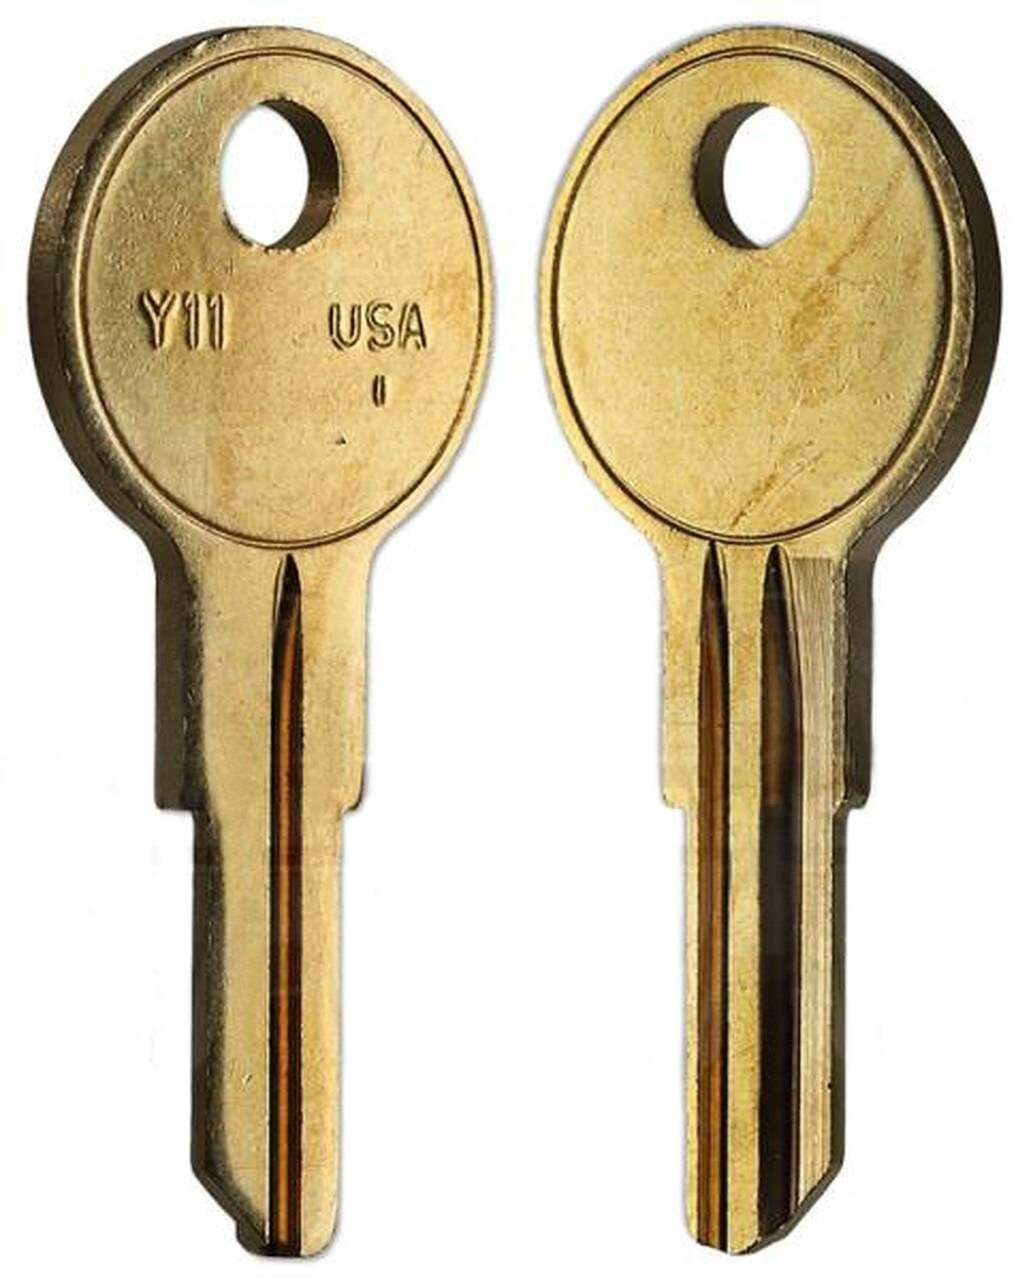 Y11-BR 34 – Cylinder Lock Key Blank, Natural Brass, 34 Price Group, For Yale